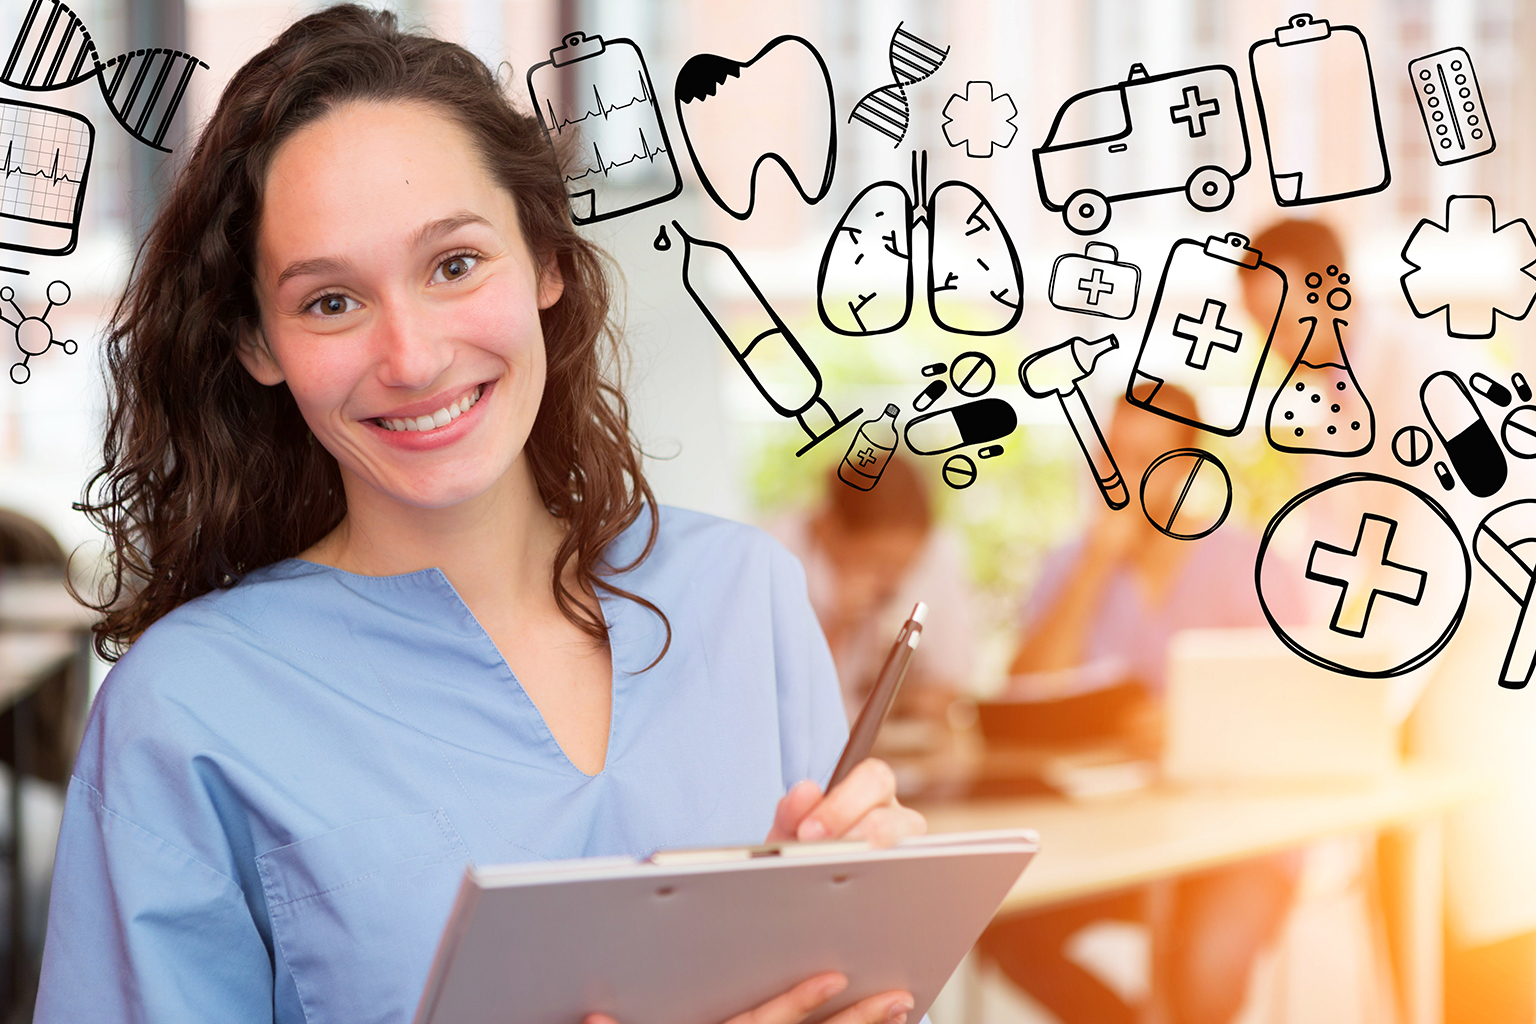 Nursing student working on a tablet with health-related icons floating around her head